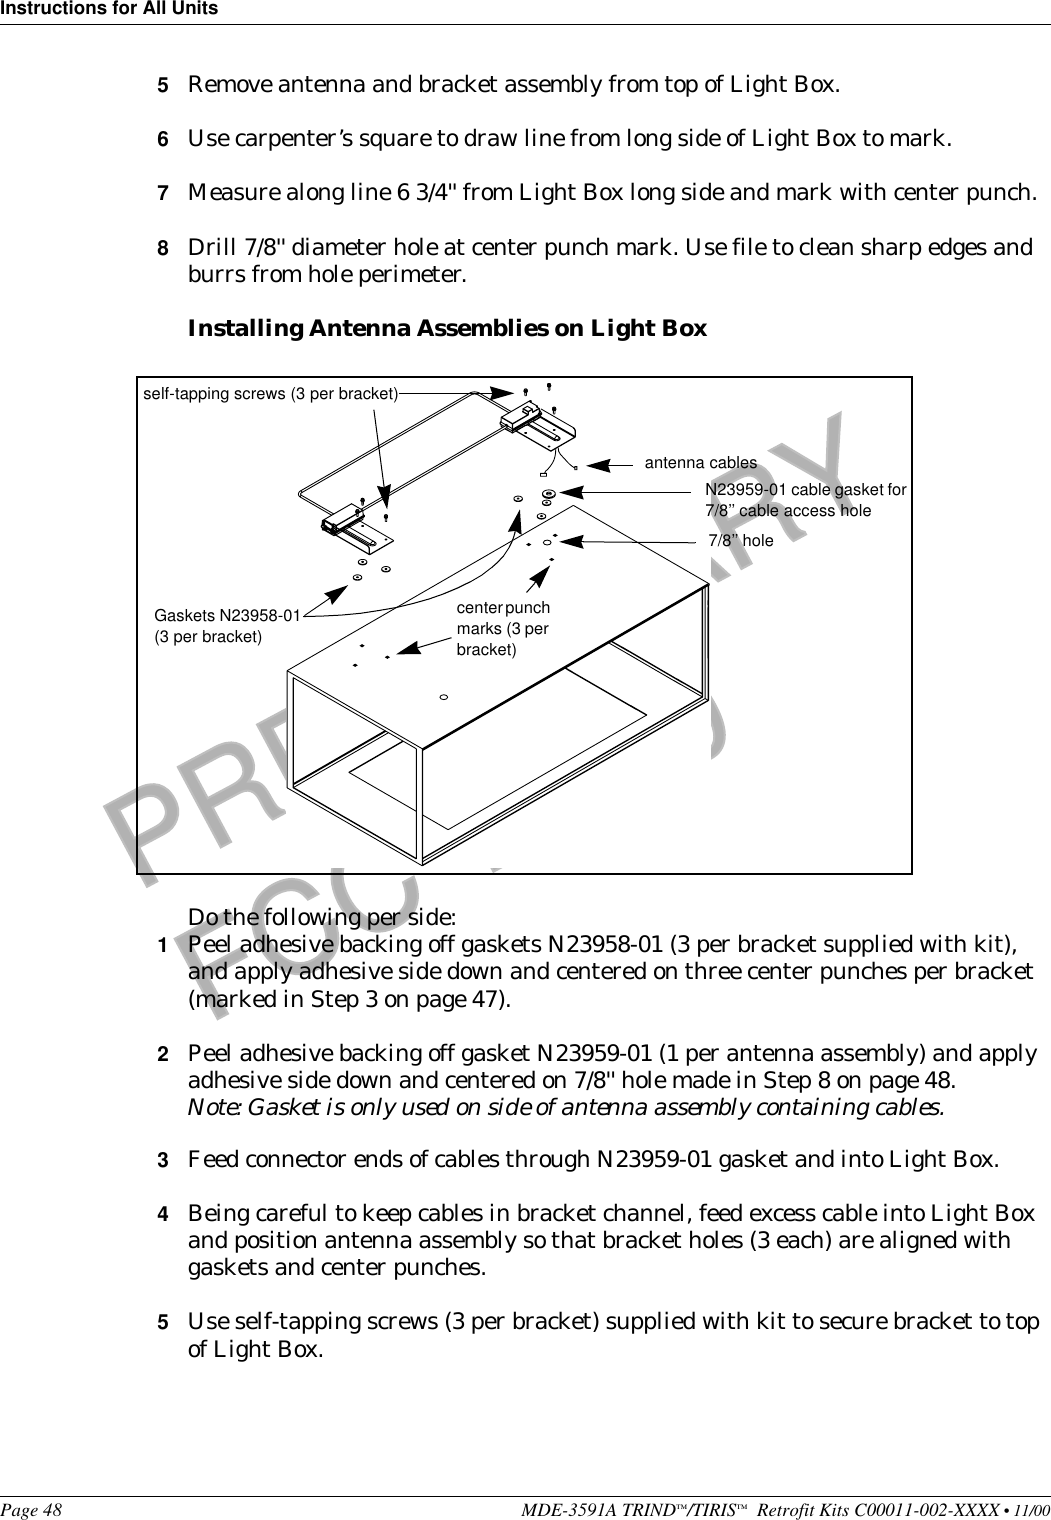 Instructions for All UnitsPage 48 MDE-3591A TRIND™/TIRIS™  Retrofit Kits C00011-002-XXXX • 11/00PRELIMINARYFCC 11/305Remove antenna and bracket assembly from top of Light Box.6Use carpenter’s square to draw line from long side of Light Box to mark.7Measure along line 6 3/4&apos;&apos; from Light Box long side and mark with center punch.8Drill 7/8&apos;&apos; diameter hole at center punch mark. Use file to clean sharp edges and burrs from hole perimeter.Installing Antenna Assemblies on Light BoxDo the following per side:1Peel adhesive backing off gaskets N23958-01 (3 per bracket supplied with kit), and apply adhesive side down and centered on three center punches per bracket (marked in Step 3 on page 47).2Peel adhesive backing off gasket N23959-01 (1 per antenna assembly) and apply adhesive side down and centered on 7/8&apos;&apos; hole made in Step 8 on page 48.Note: Gasket is only used on side of antenna assembly containing cables.3Feed connector ends of cables through N23959-01 gasket and into Light Box.4Being careful to keep cables in bracket channel, feed excess cable into Light Box and position antenna assembly so that bracket holes (3 each) are aligned with gaskets and center punches.5Use self-tapping screws (3 per bracket) supplied with kit to secure bracket to top of Light Box.antenna cablesN23959-01 cable gasket for 7/8’’ cable access hole7/8’’ holeself-tapping screws (3 per bracket)Gaskets N23958-01 (3 per bracket)center punch marks (3 per bracket)